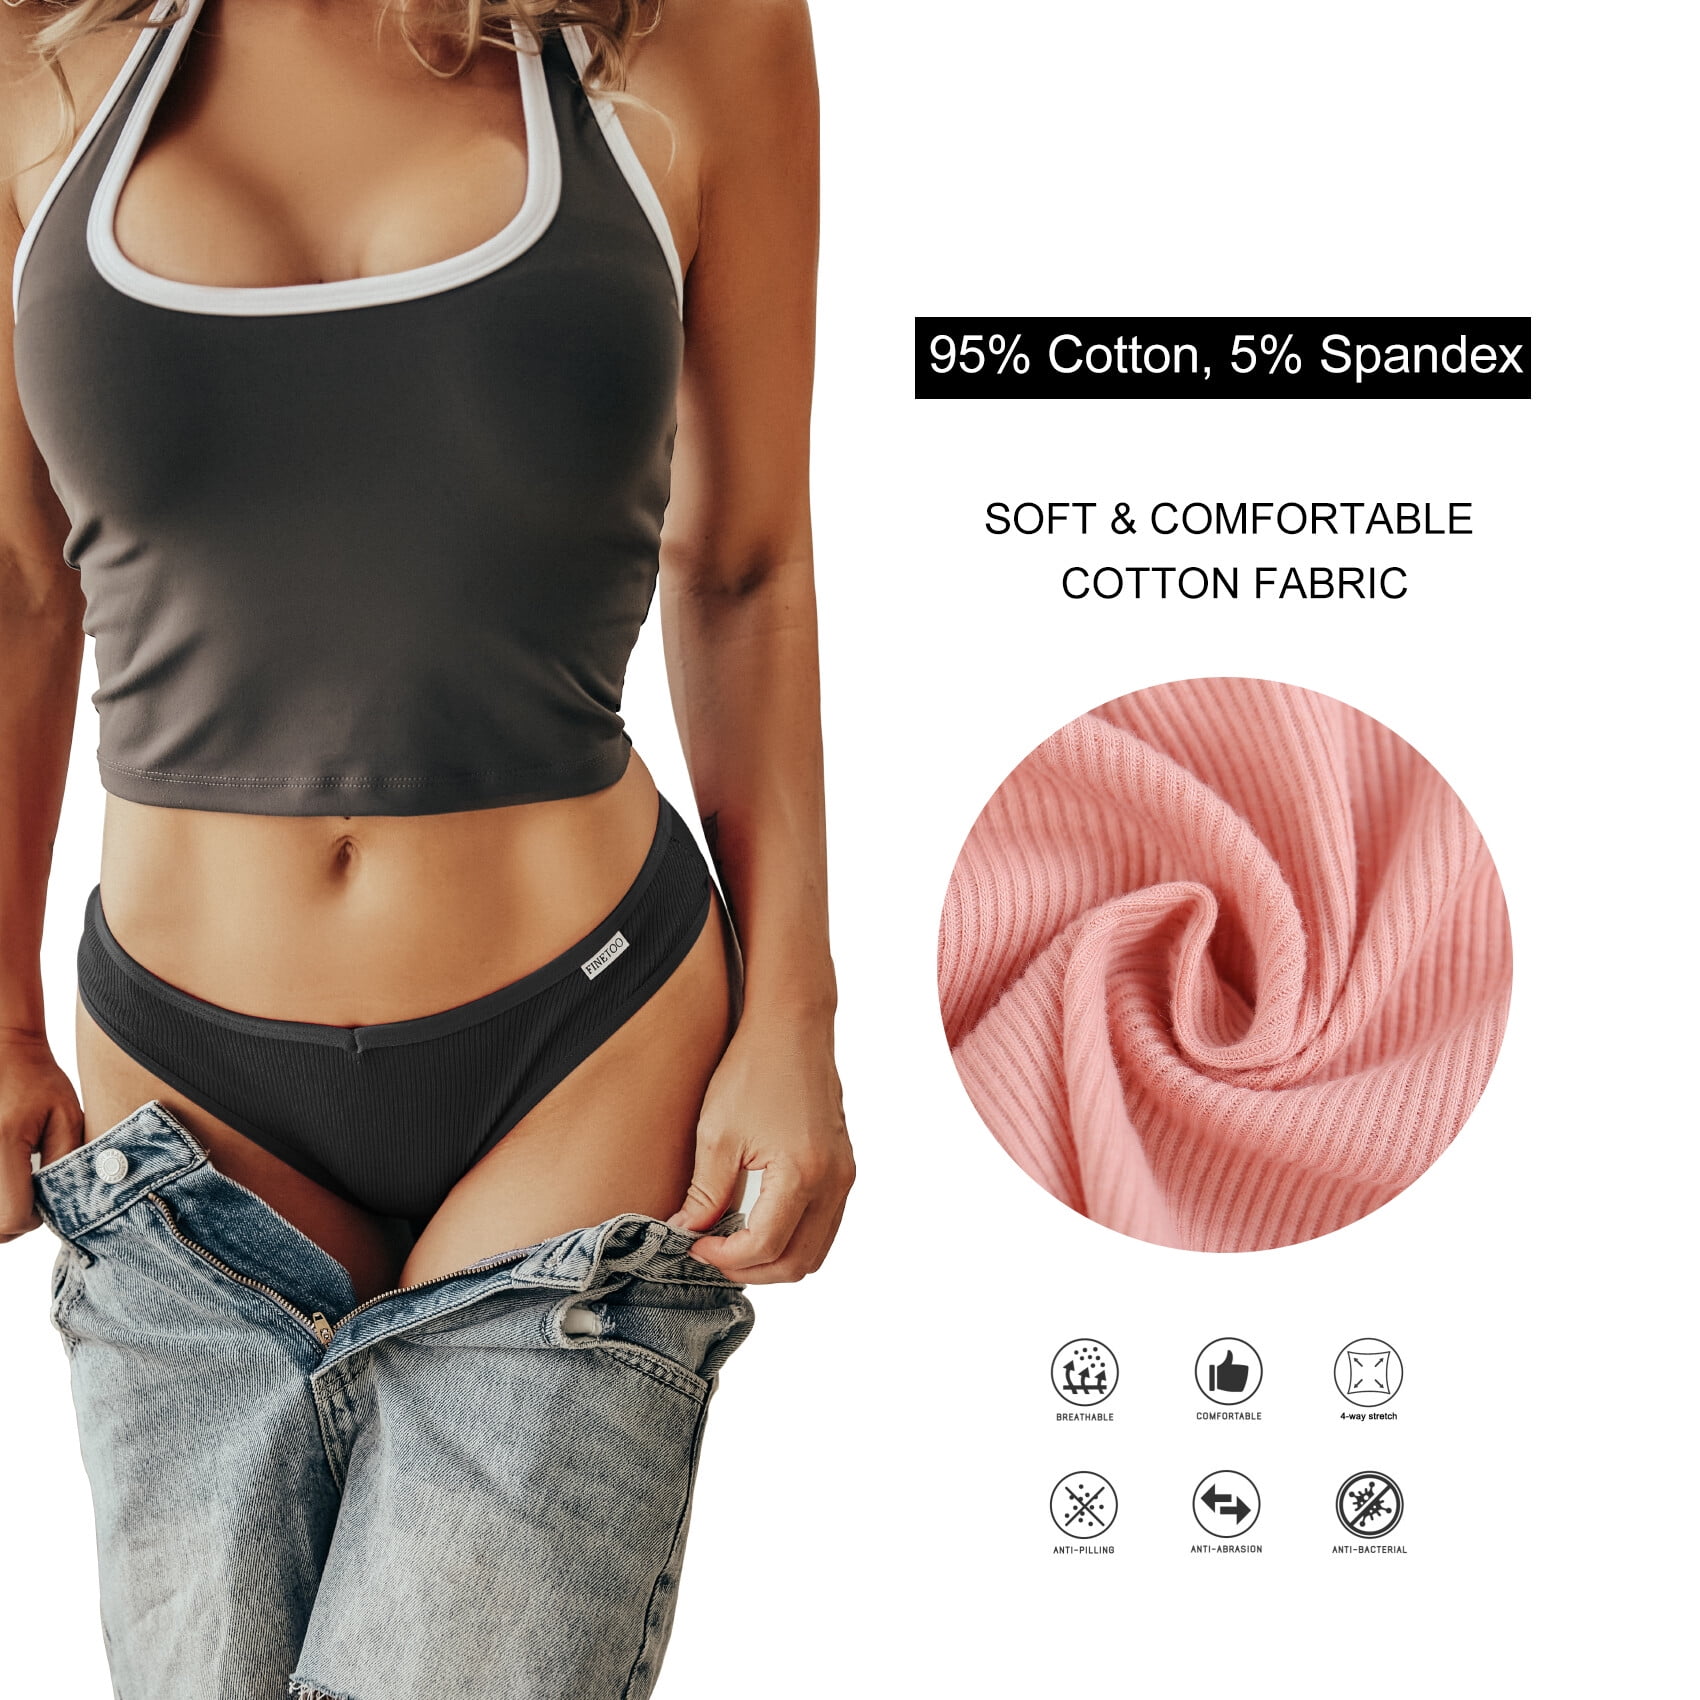 FINETOO Cotton Underwear for Women Breathable Soft Stretch Hipster